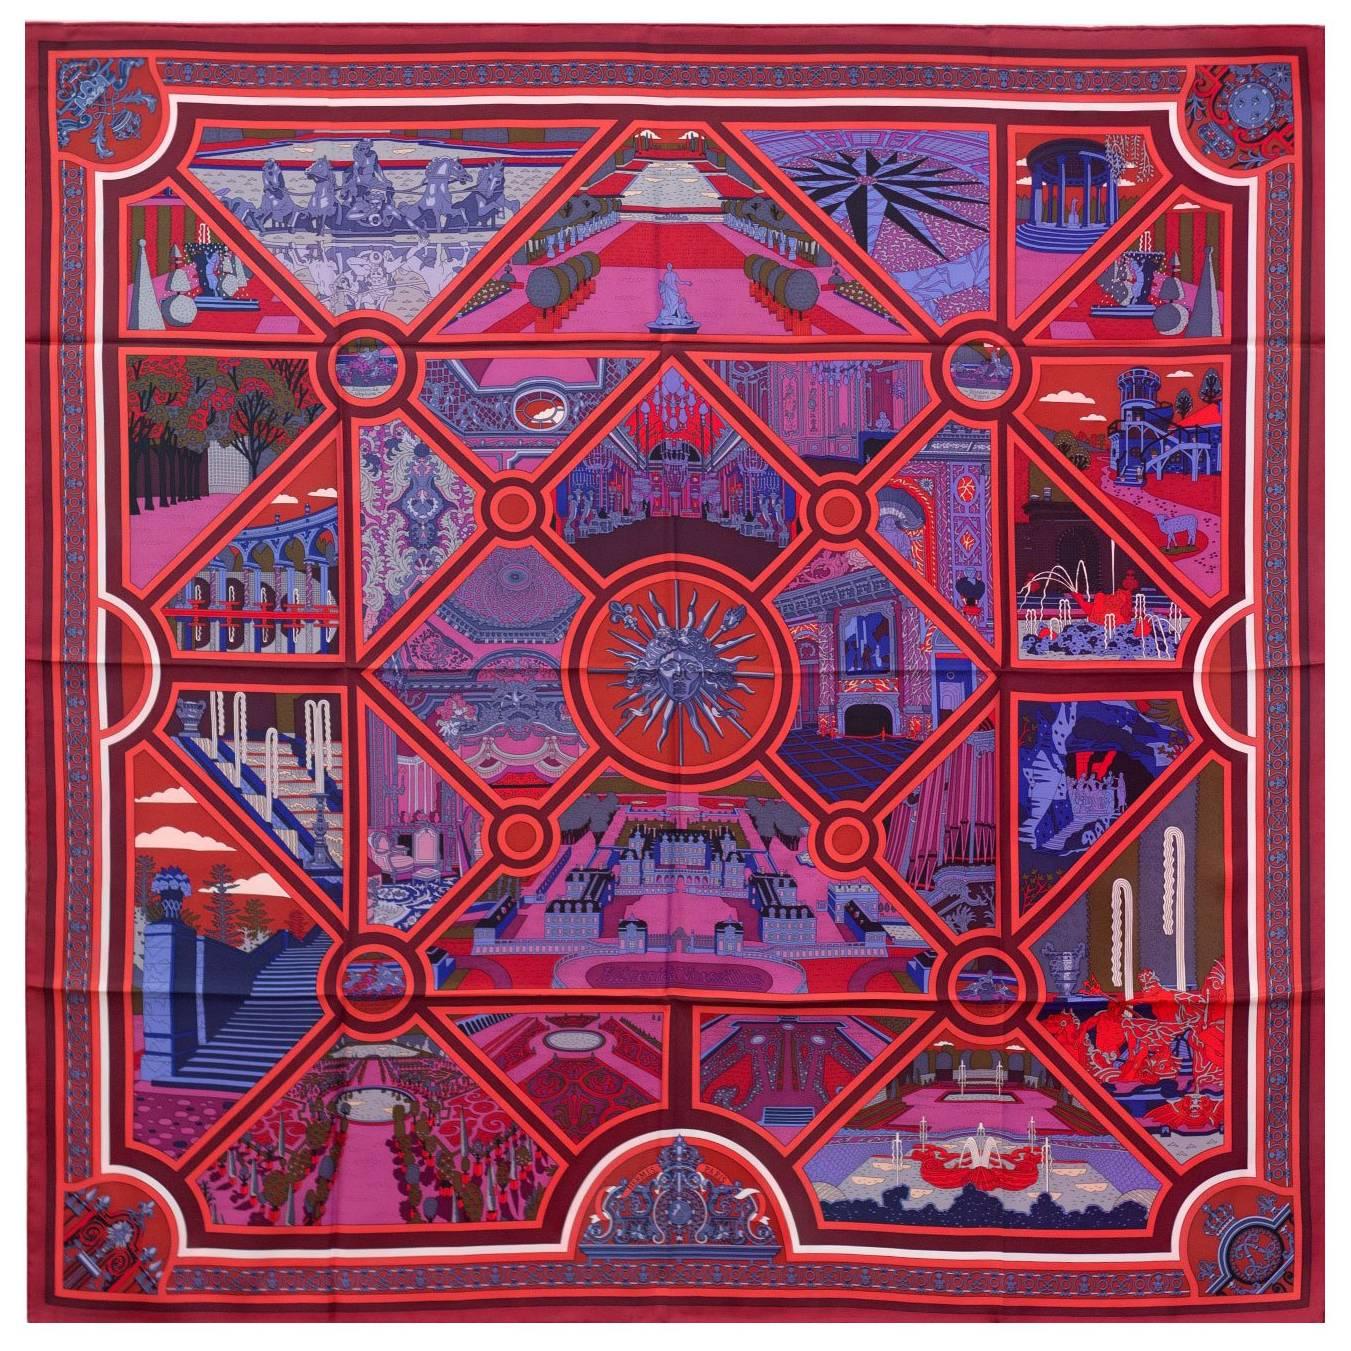 Hermes Scarf "Carre" "Flanerie a Versailles" by Pierre Marie 36" x 36" 2016